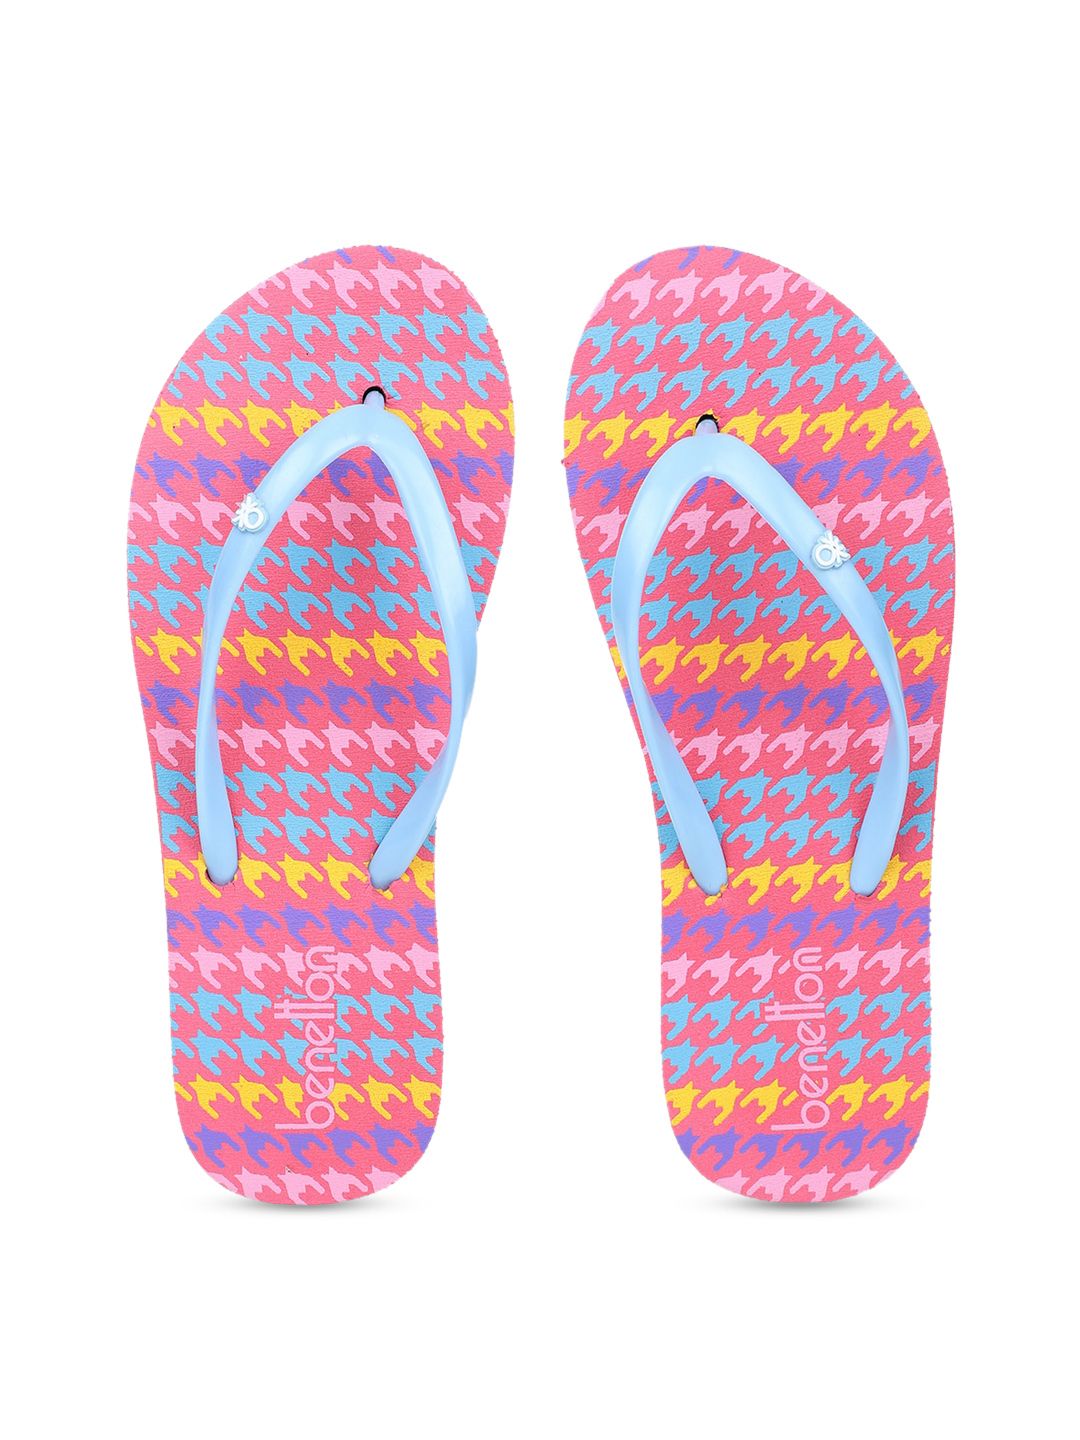 United Colors of Benetton Women Pink & Blue Printed Thong Flip-Flops Price in India